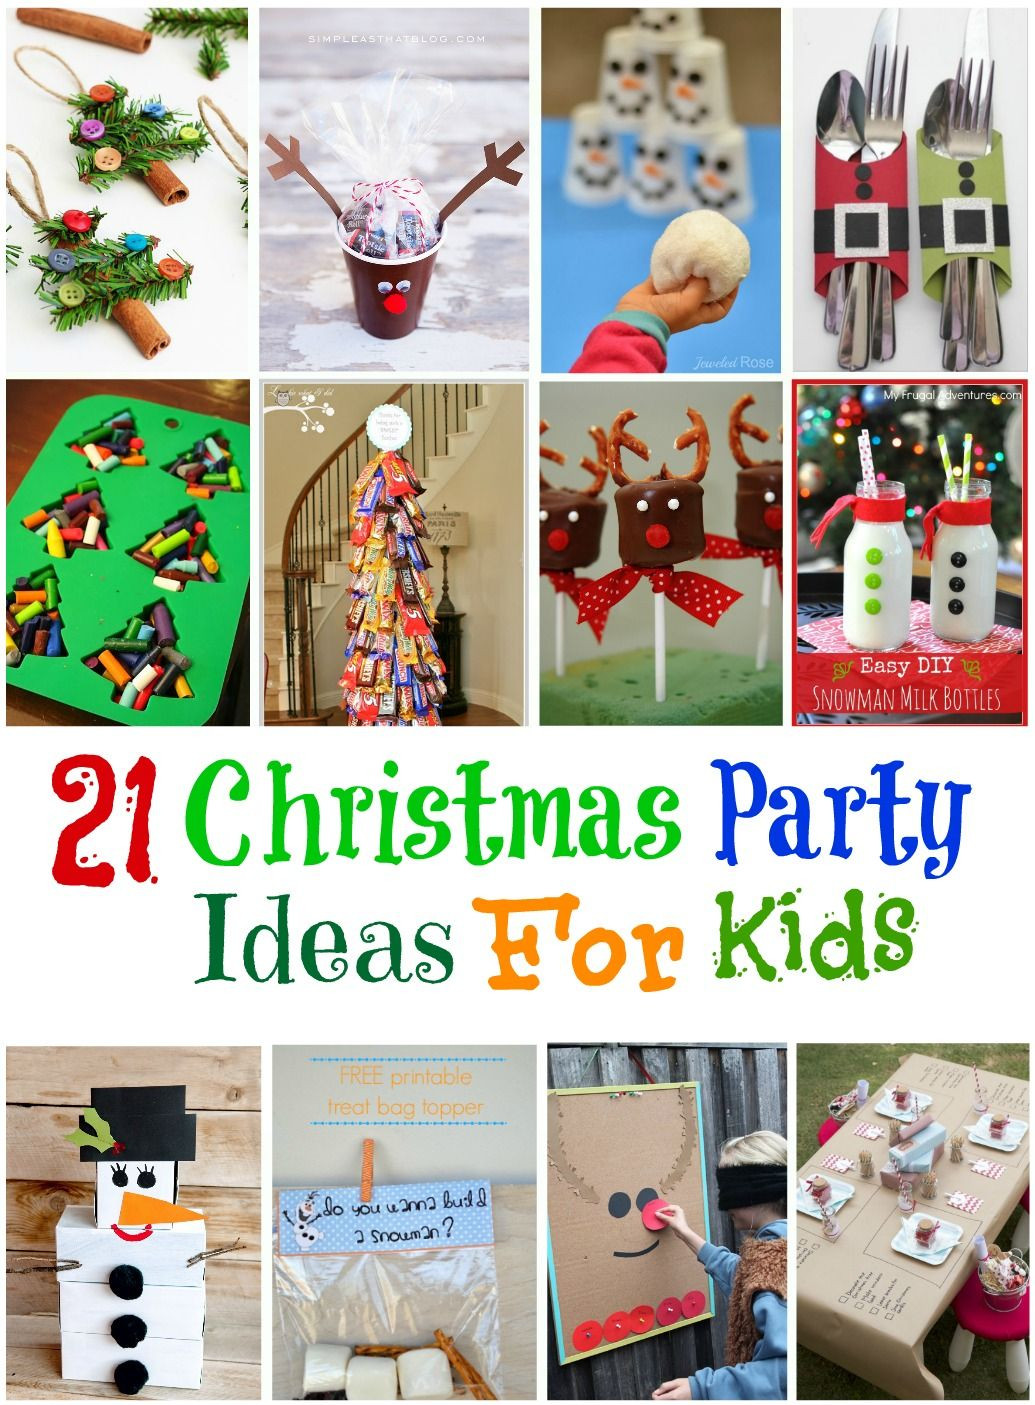 School Christmas Party Ideas
 21 Amazing Christmas Party Ideas for Kids